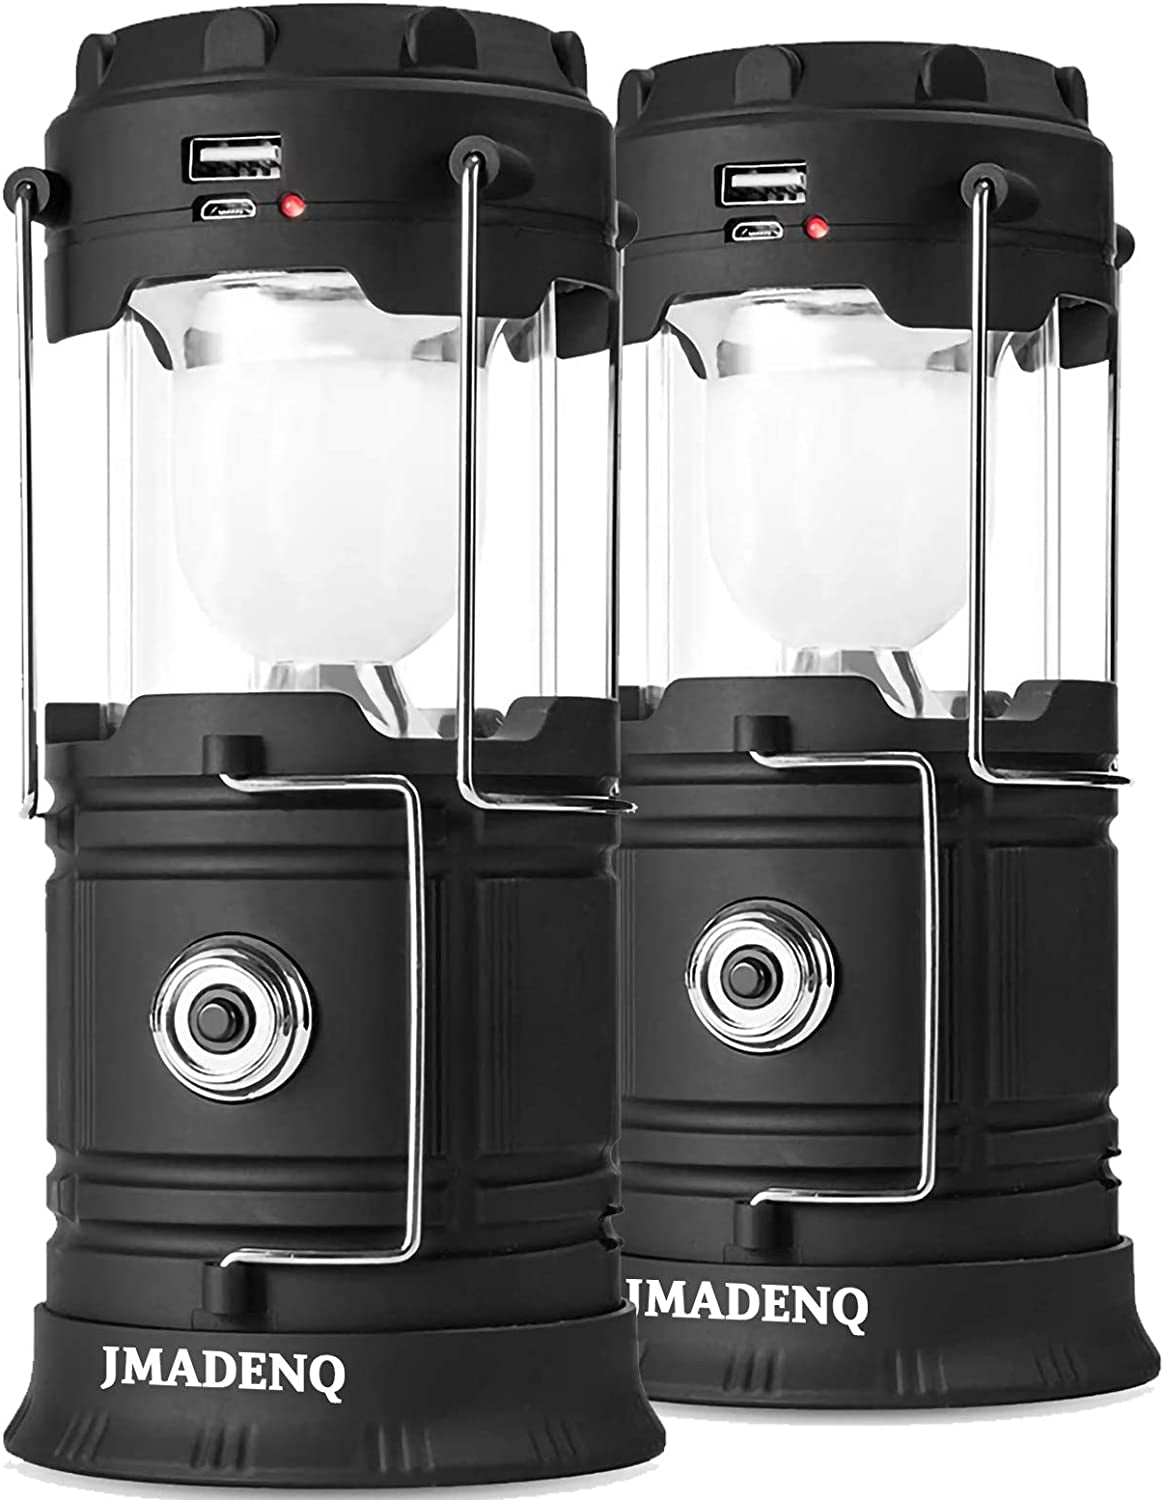 JMADENQ, Lanterns, Camping Lantern, Solar Lantern Flashlights Charging for Phone, USB Rechargeable Led Camping Lantern, Collapsible & Portable for Emergency, Hurricanes, Power Outage, Storm (2 Pack)